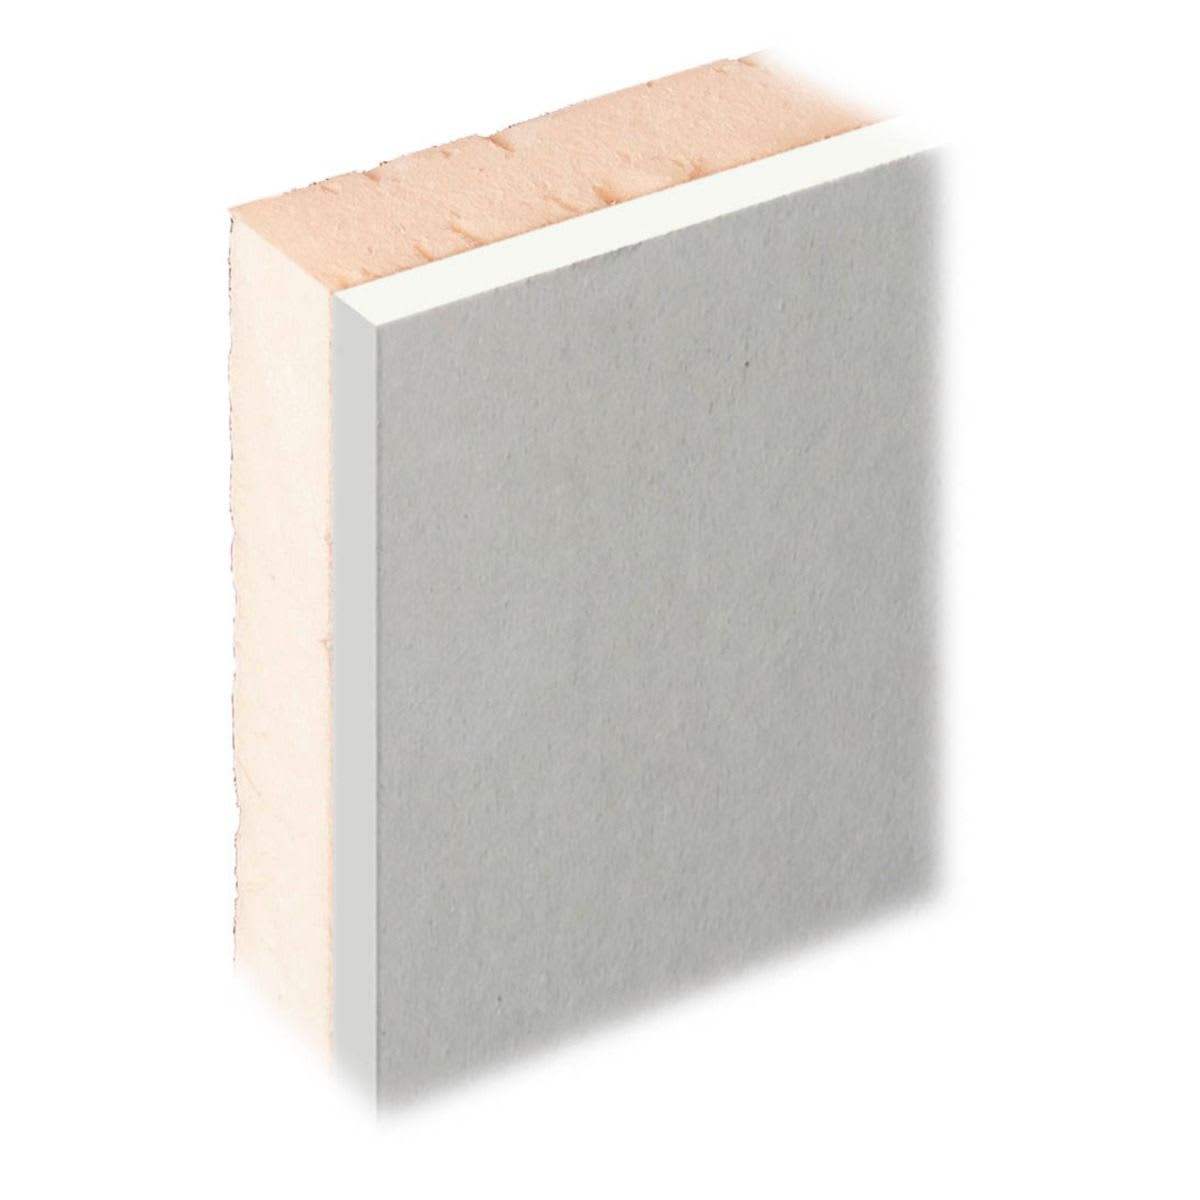 Knauf XPS Laminate Plus Insulated Plasterboard Tapered Edge